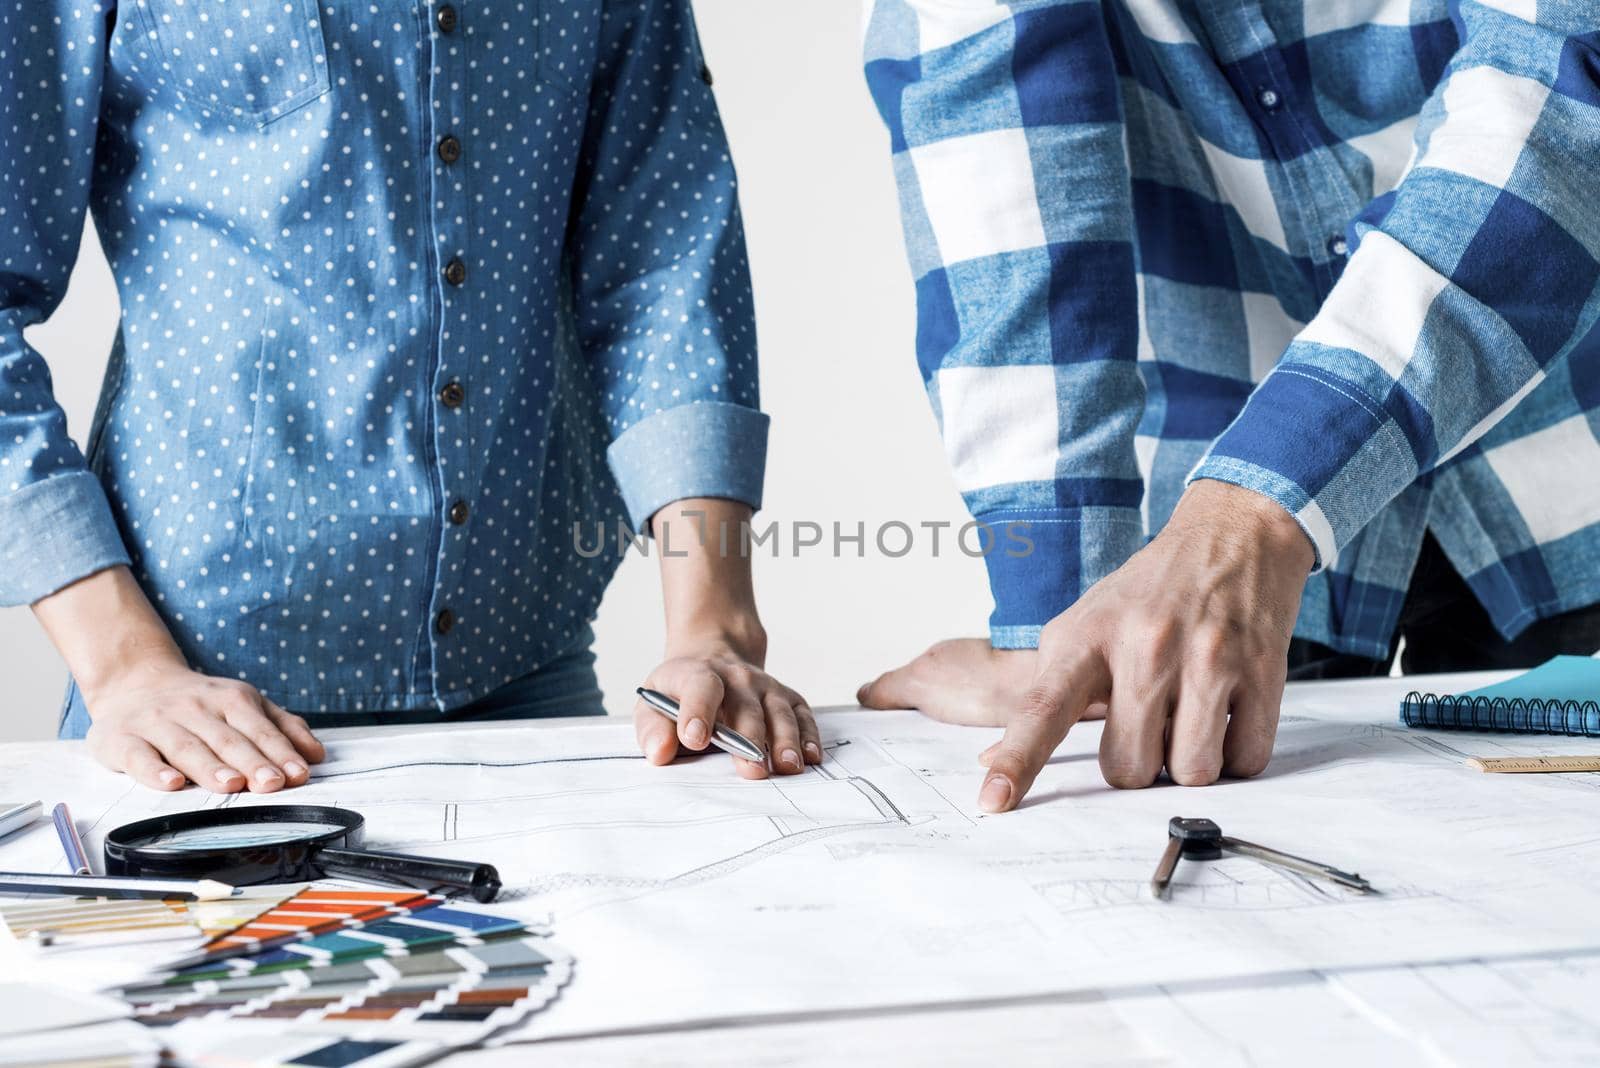 Man and woman together working at design project. Creative teamwork at workspace with construction blueprint and color swatches. People standing near desk and discussing in architecture studio.